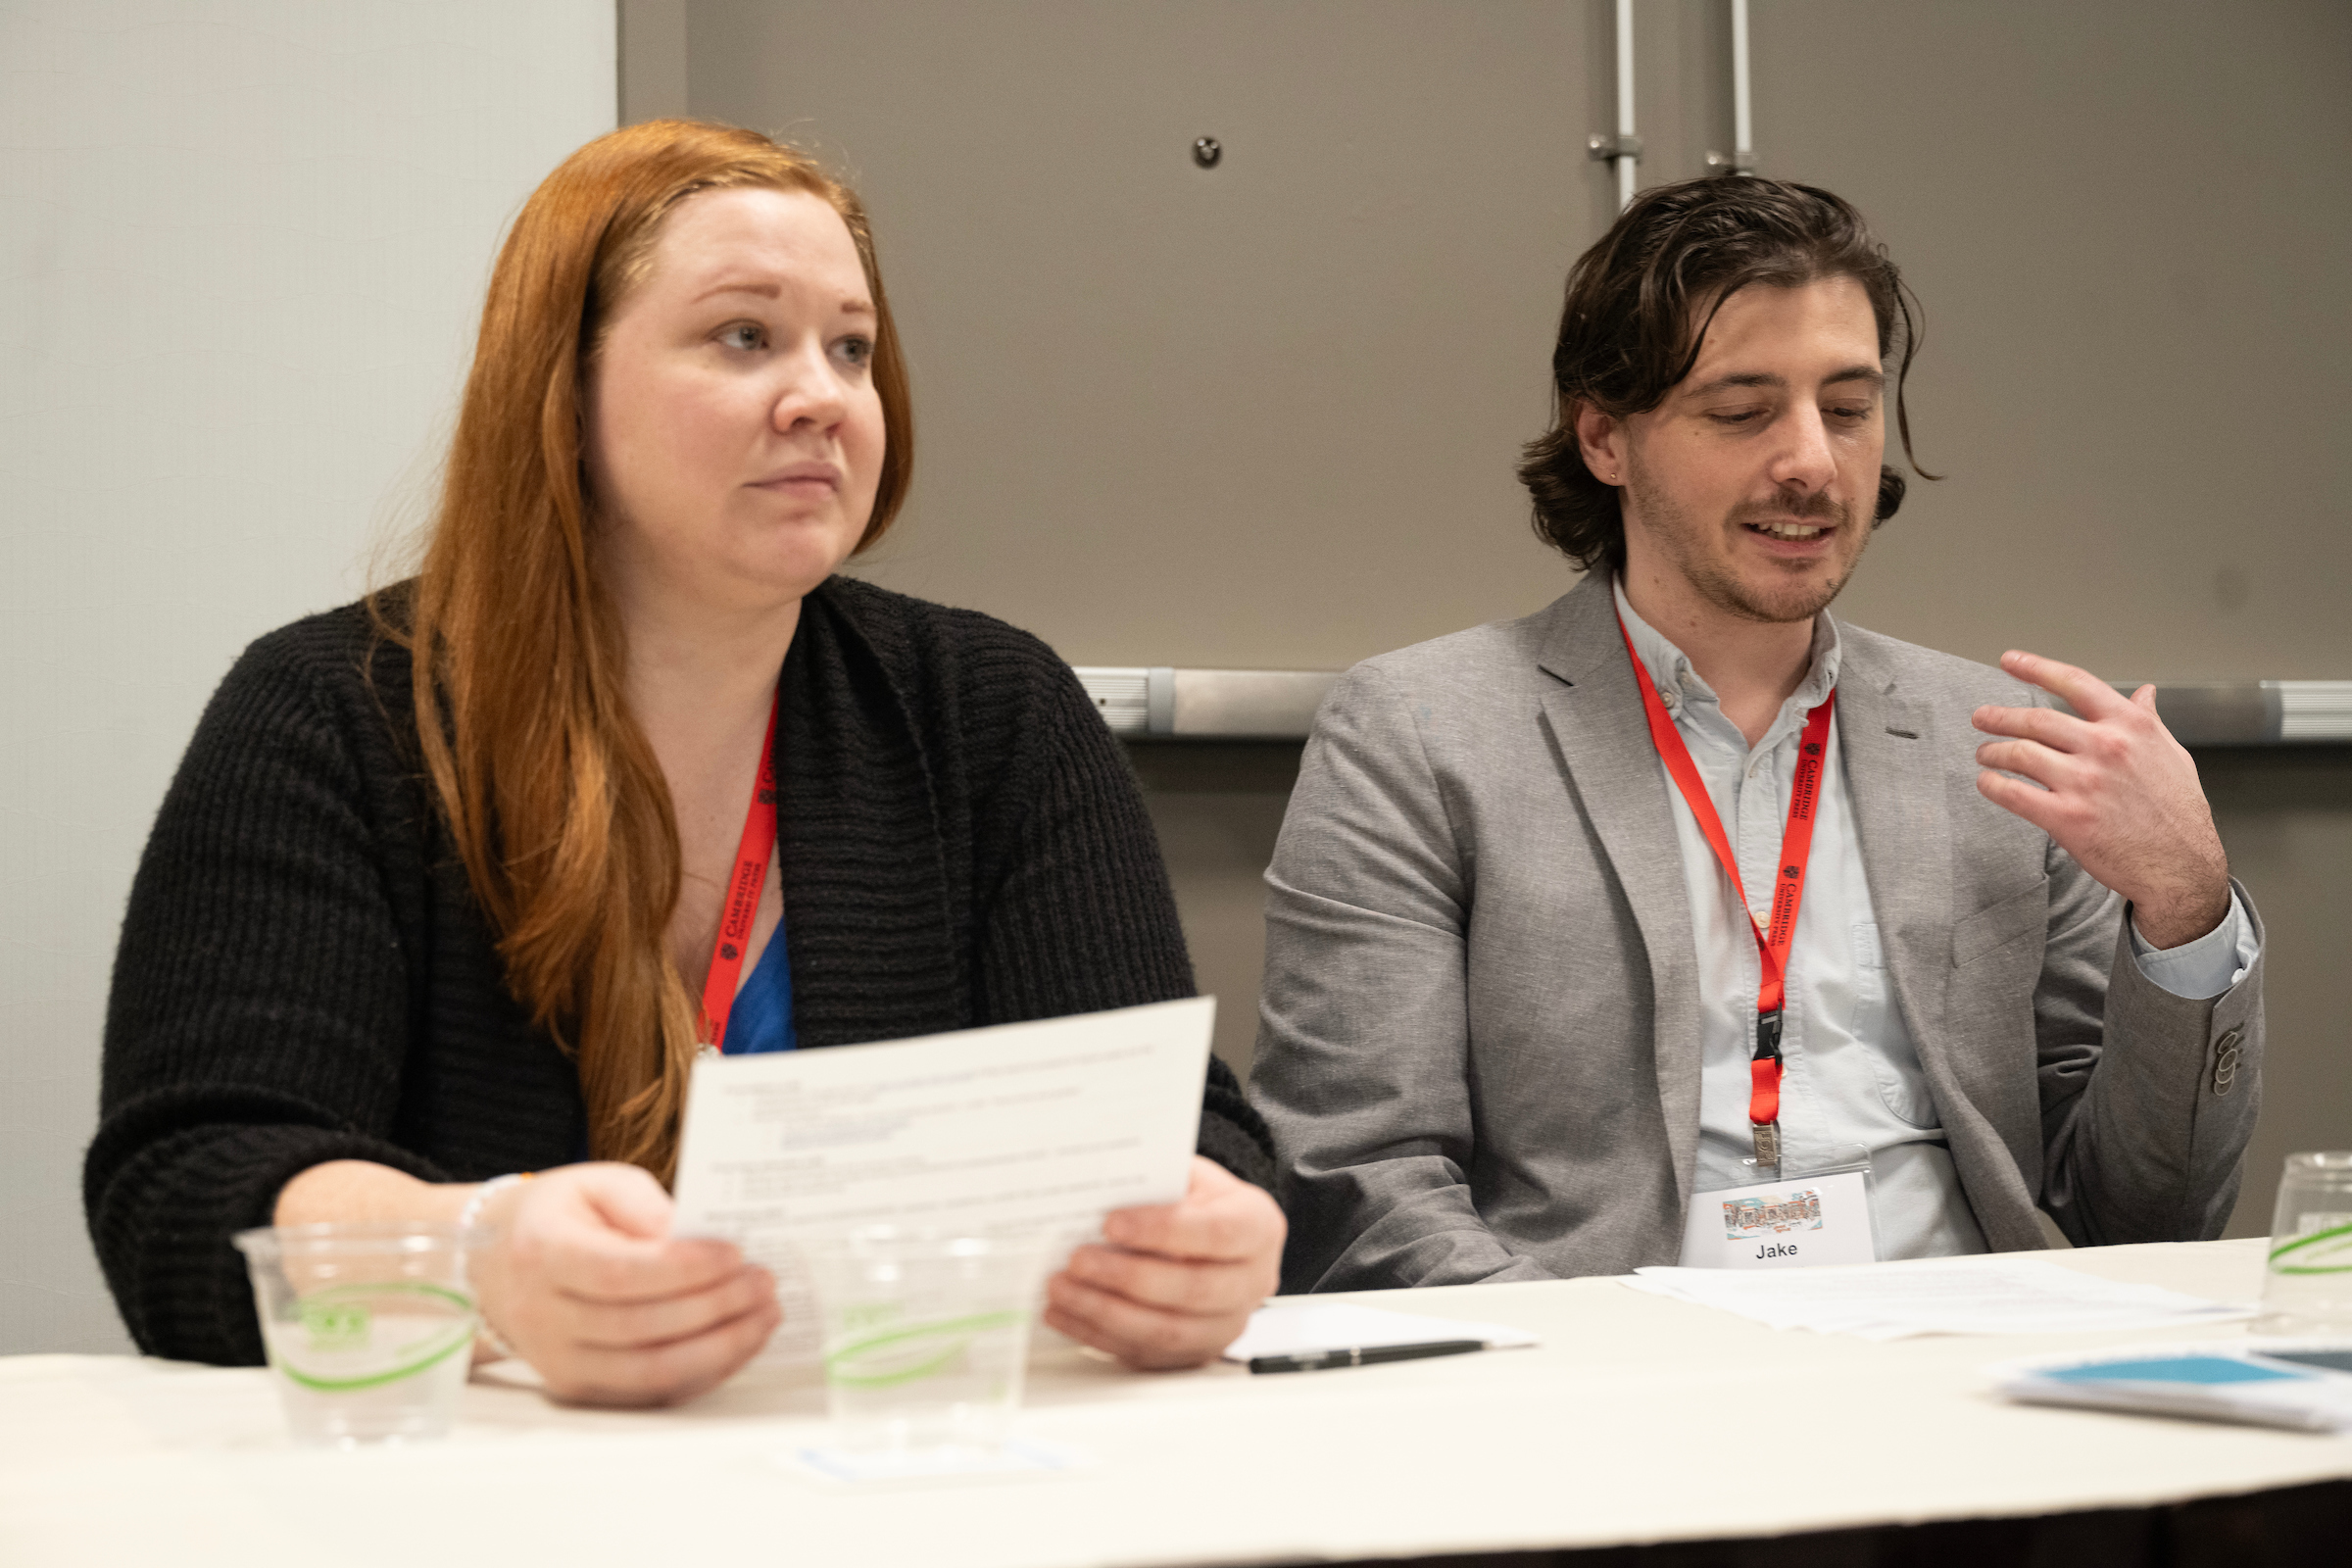 A white woman with long red hair holding a paper next to a white man speaking on a panel 